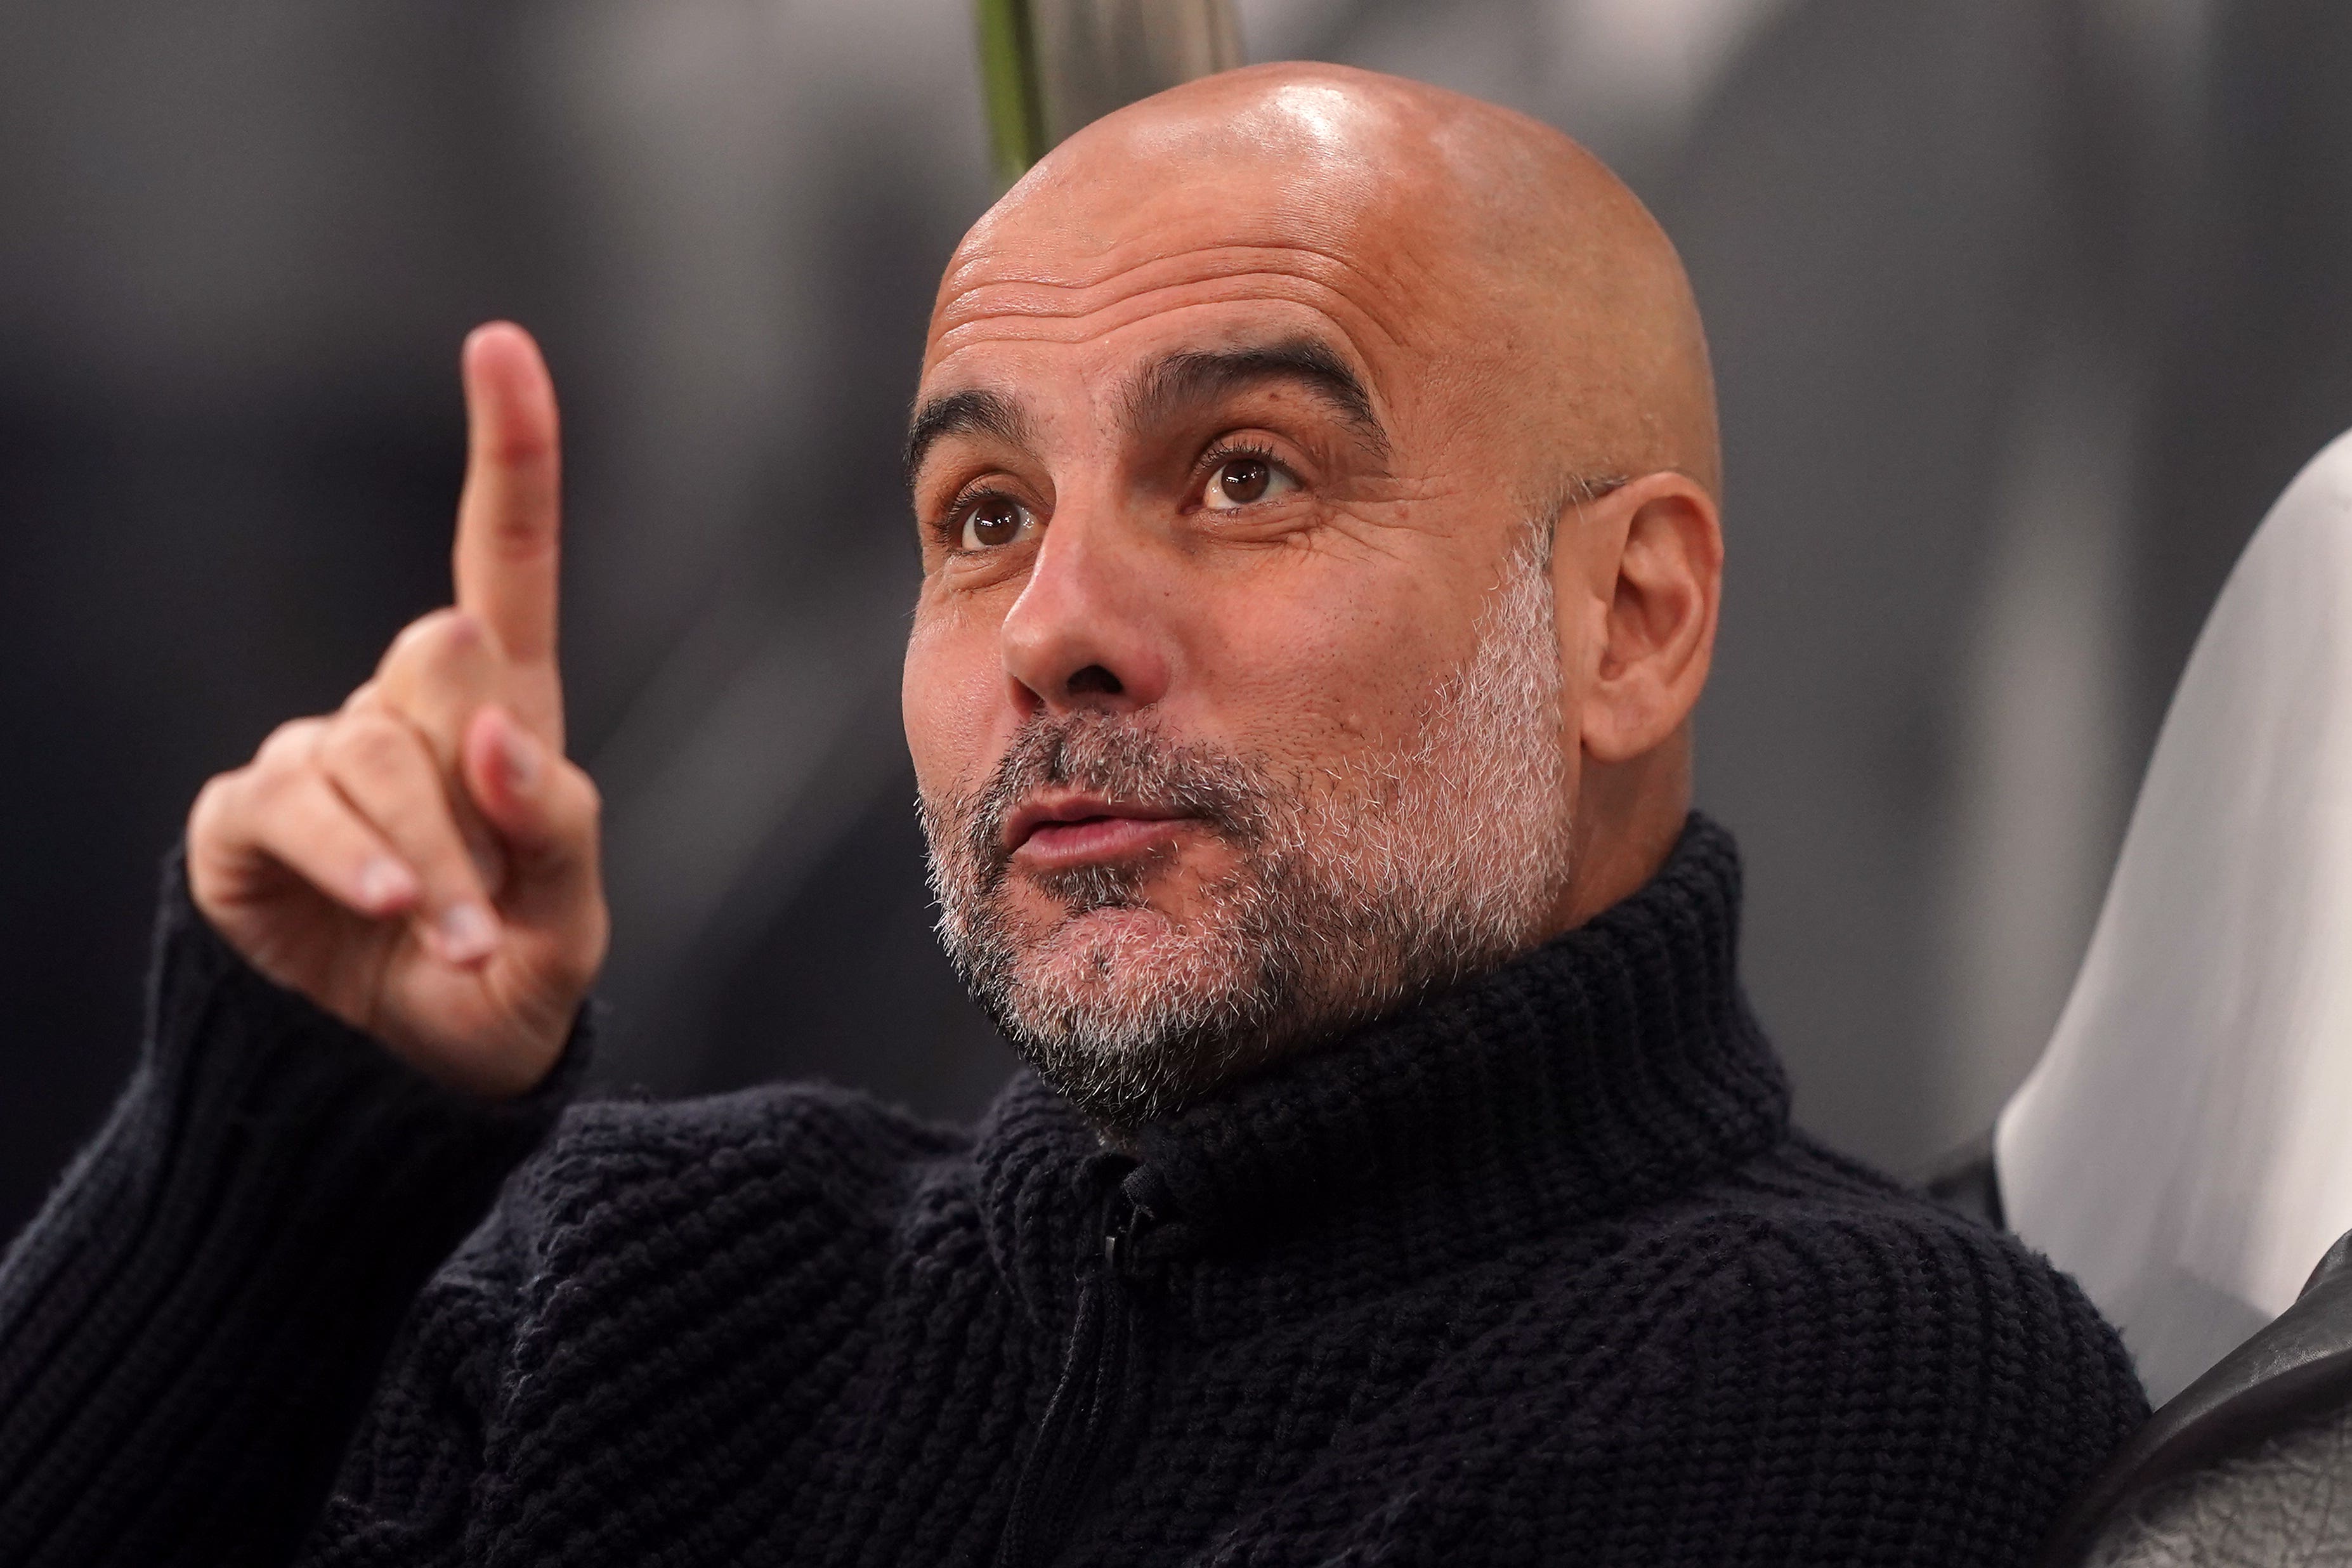 Manchester City manager Pep Guardiola was able to take positives from the Carabao Cup third round defeat at Newcastle (Owen Humphreys/PA)